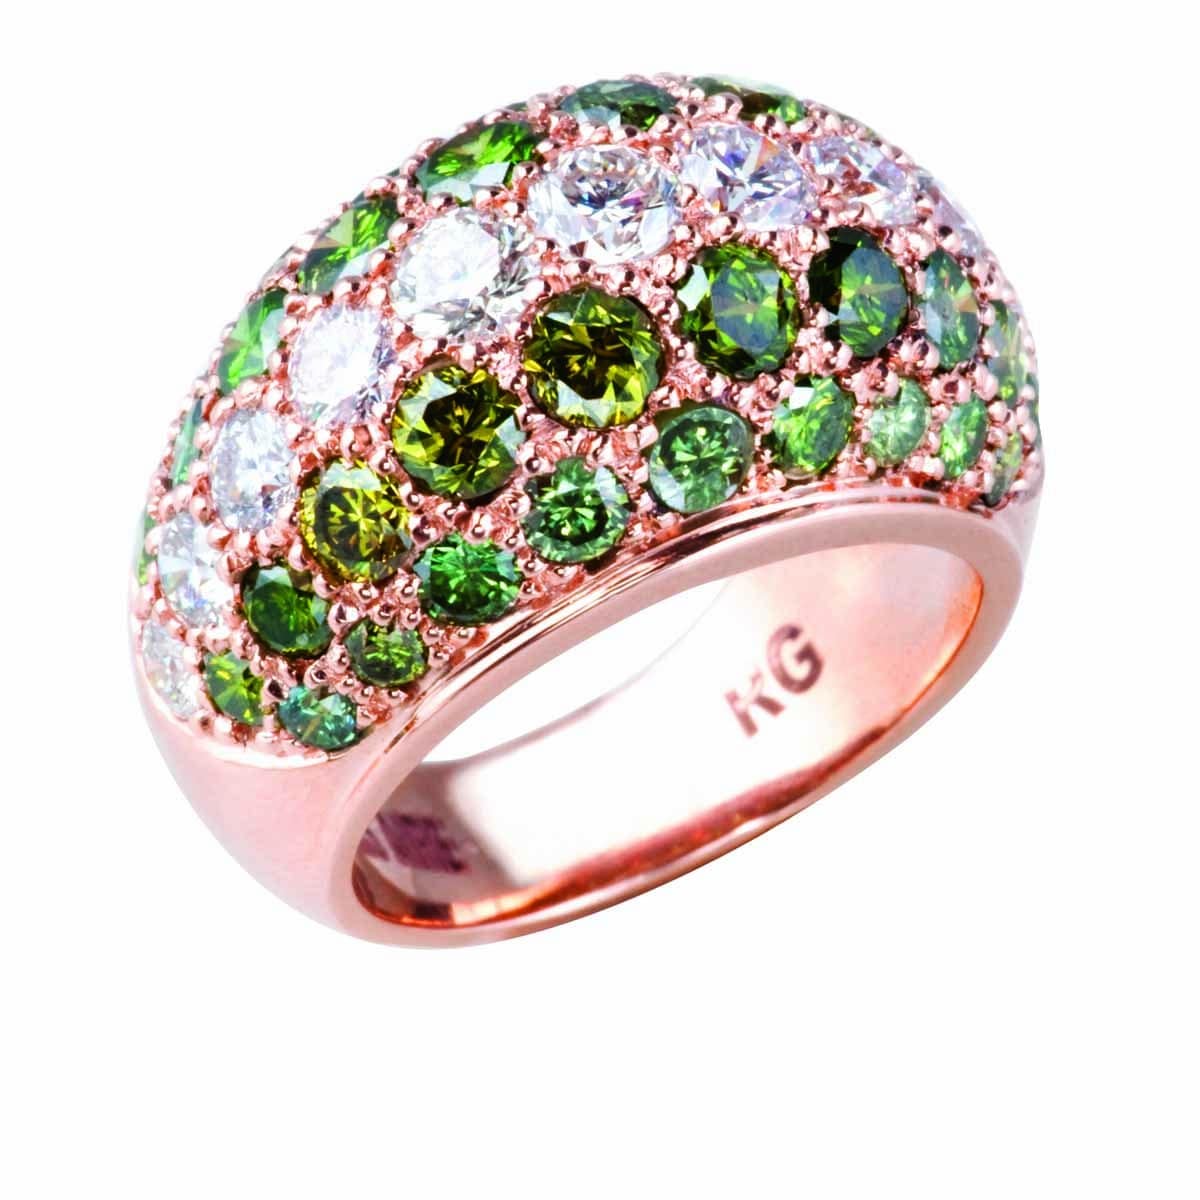 GREEN DIAMOND RING - EVERGREEN - Chris Aire Fine Jewelry & Timepieces